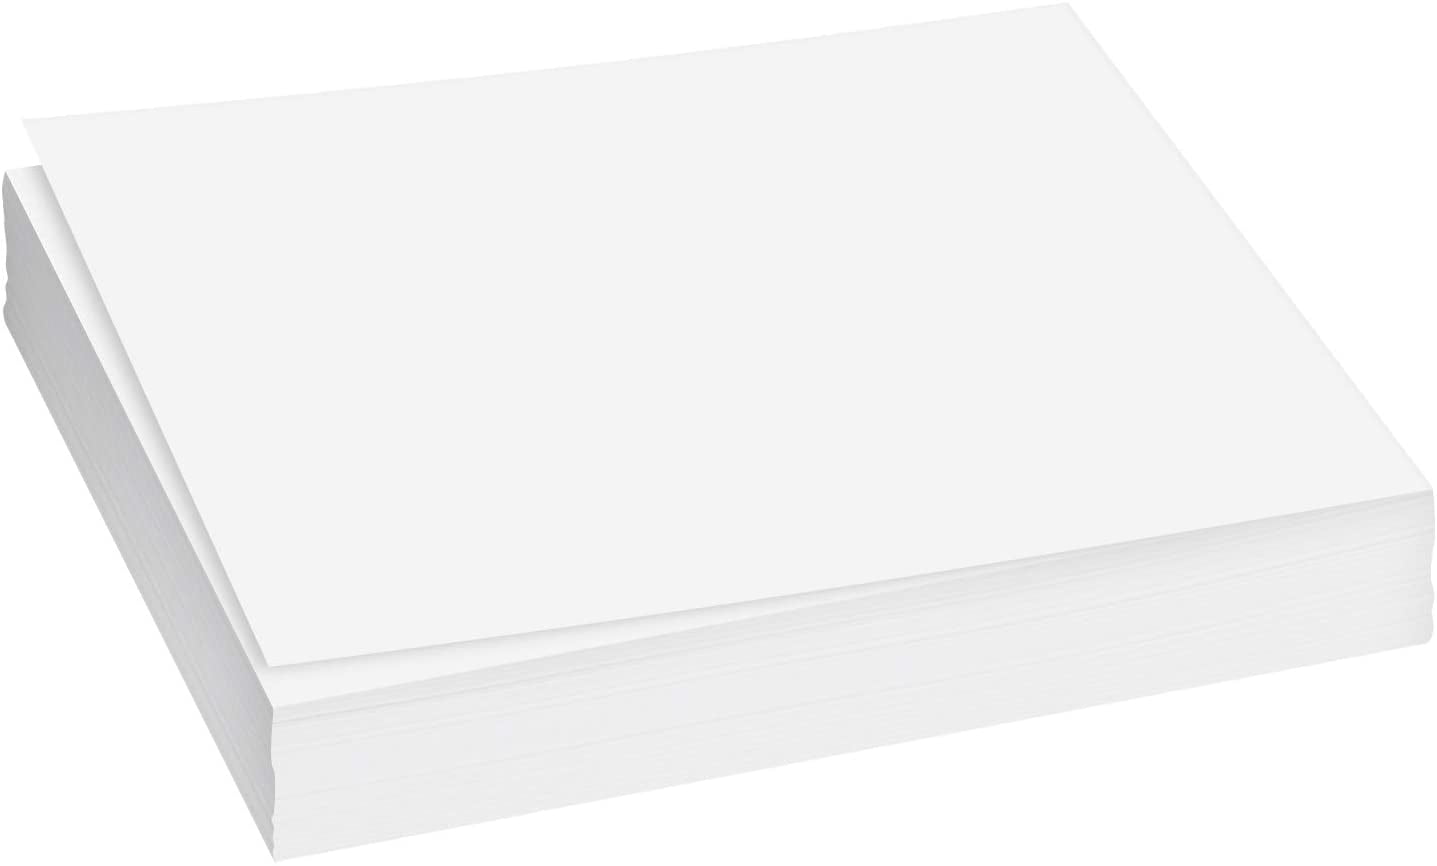 Writing Printing Cover Cardstock A4 Premium White Card Stock Paper 210 x 297 mm Great for Copy 8.27 x 11.69 176gsm | 65lb 50 Sheets per Pack